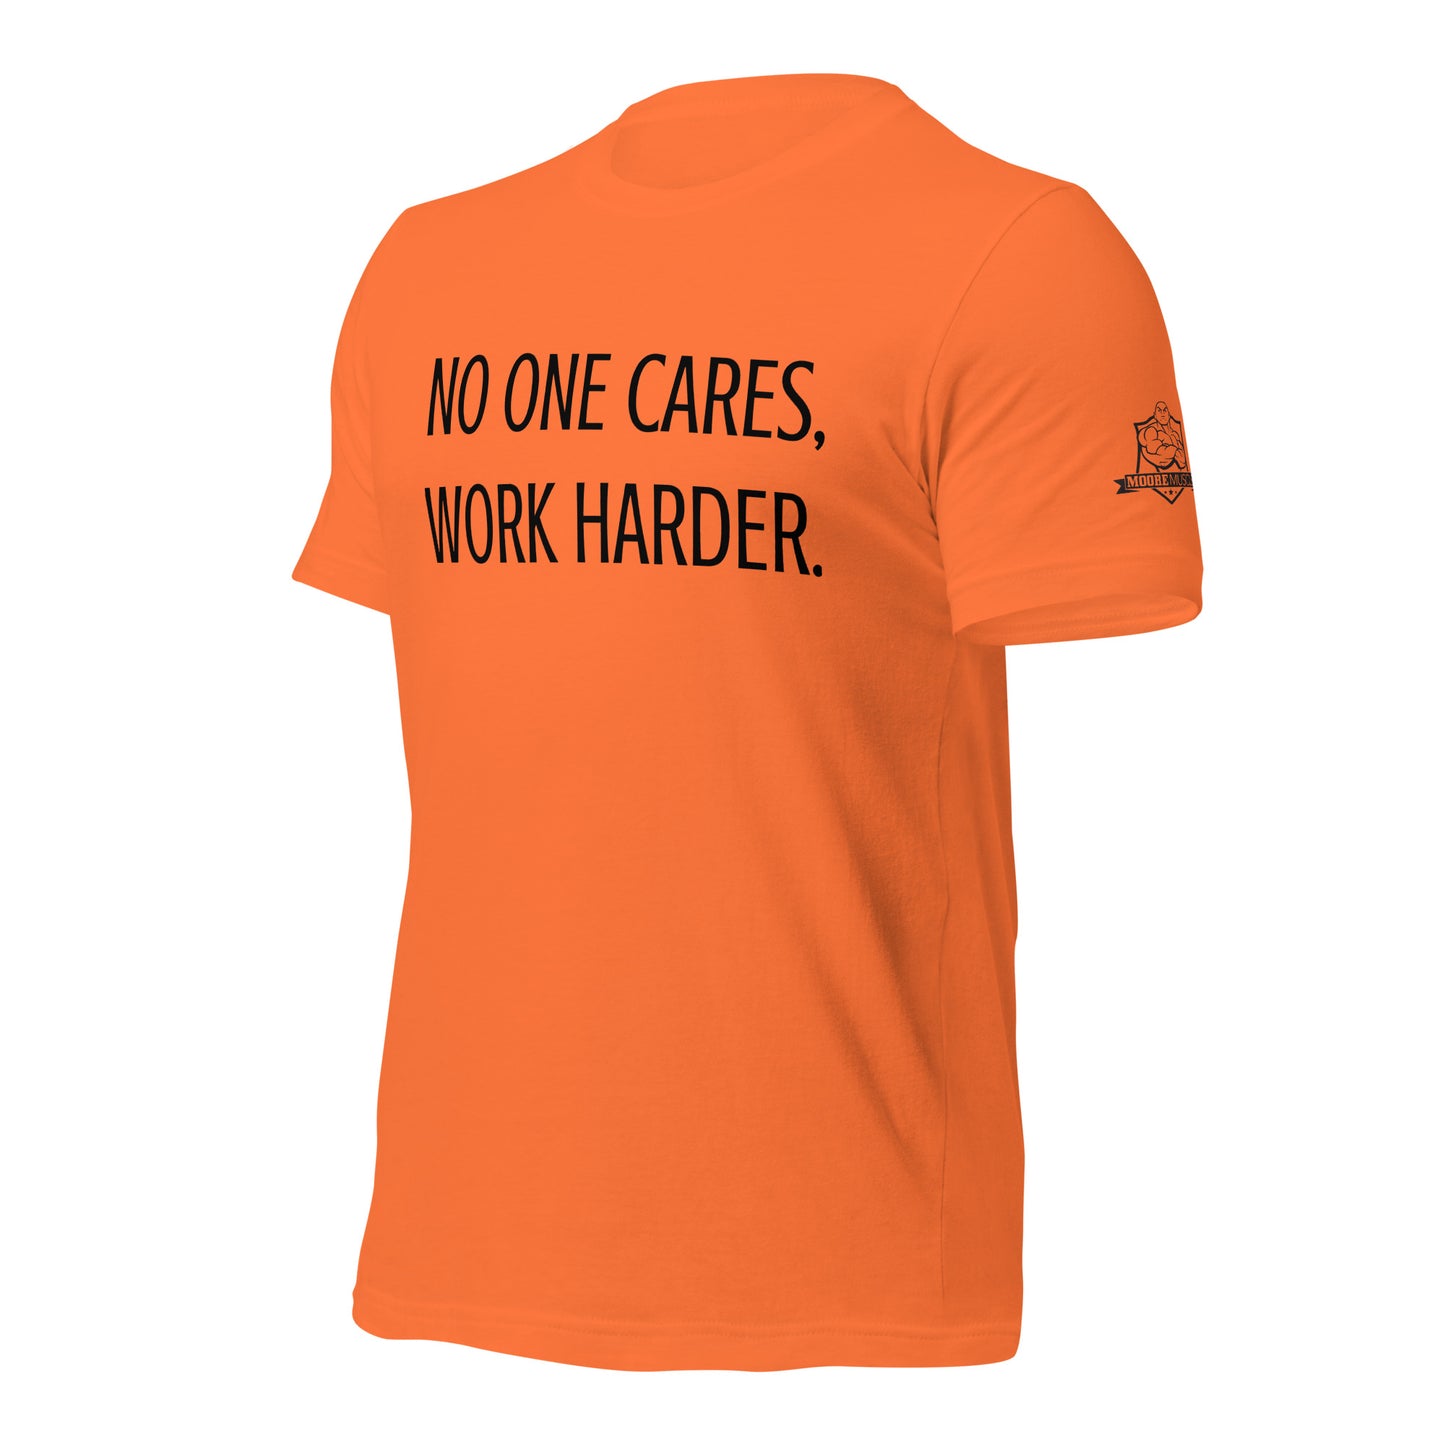 No One Cares, Work Harder